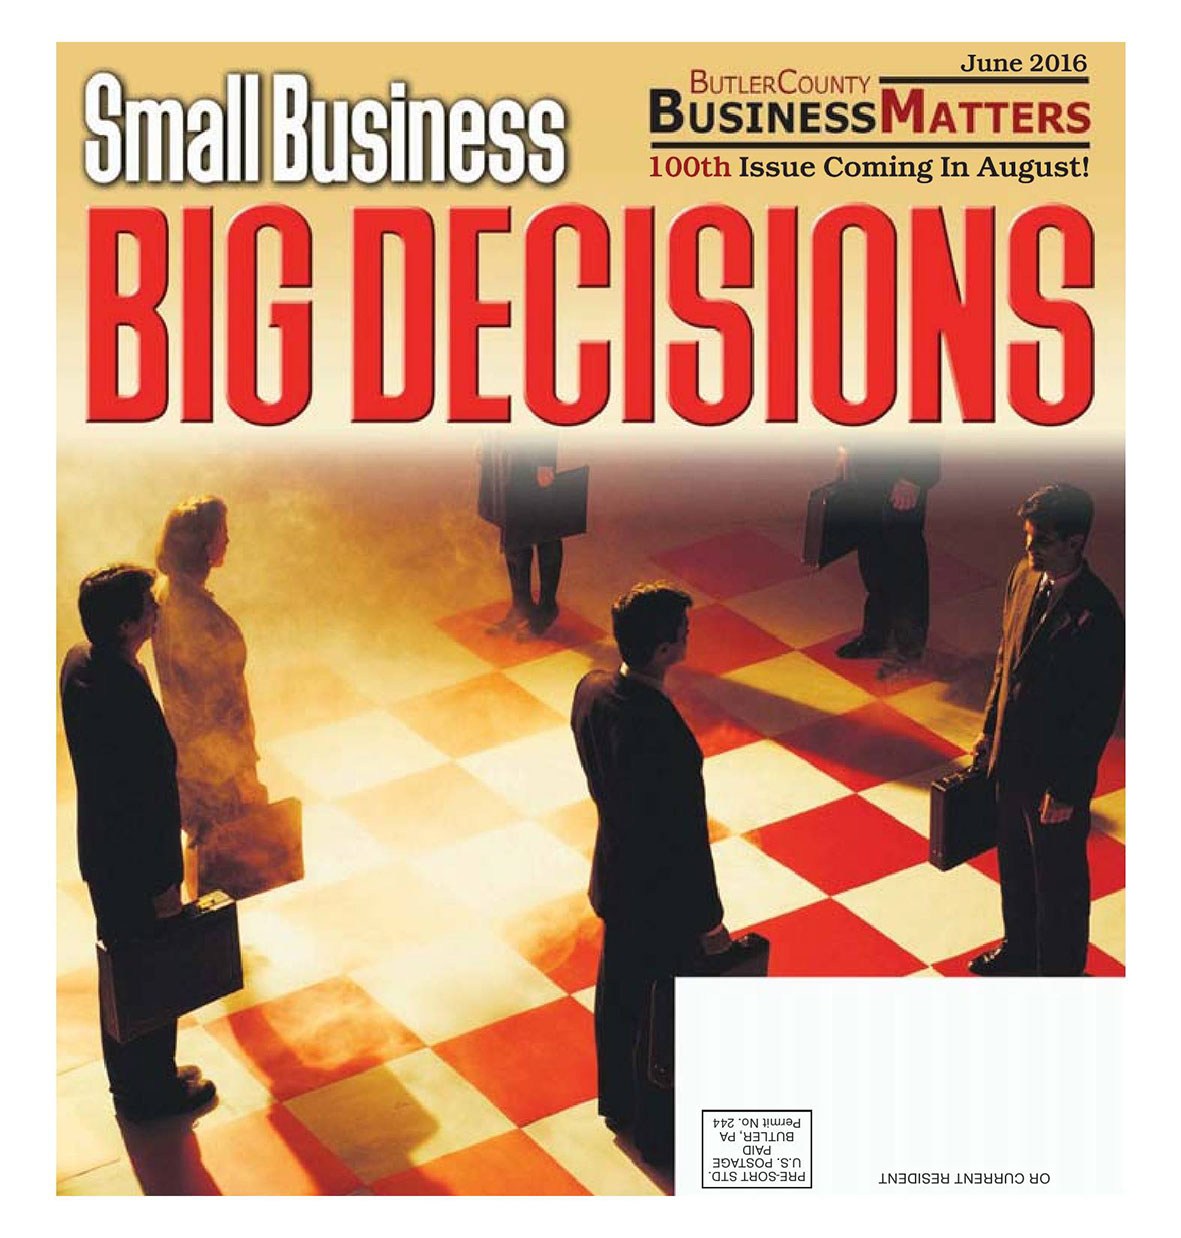 June 2016 - Small Business - Big Decisions